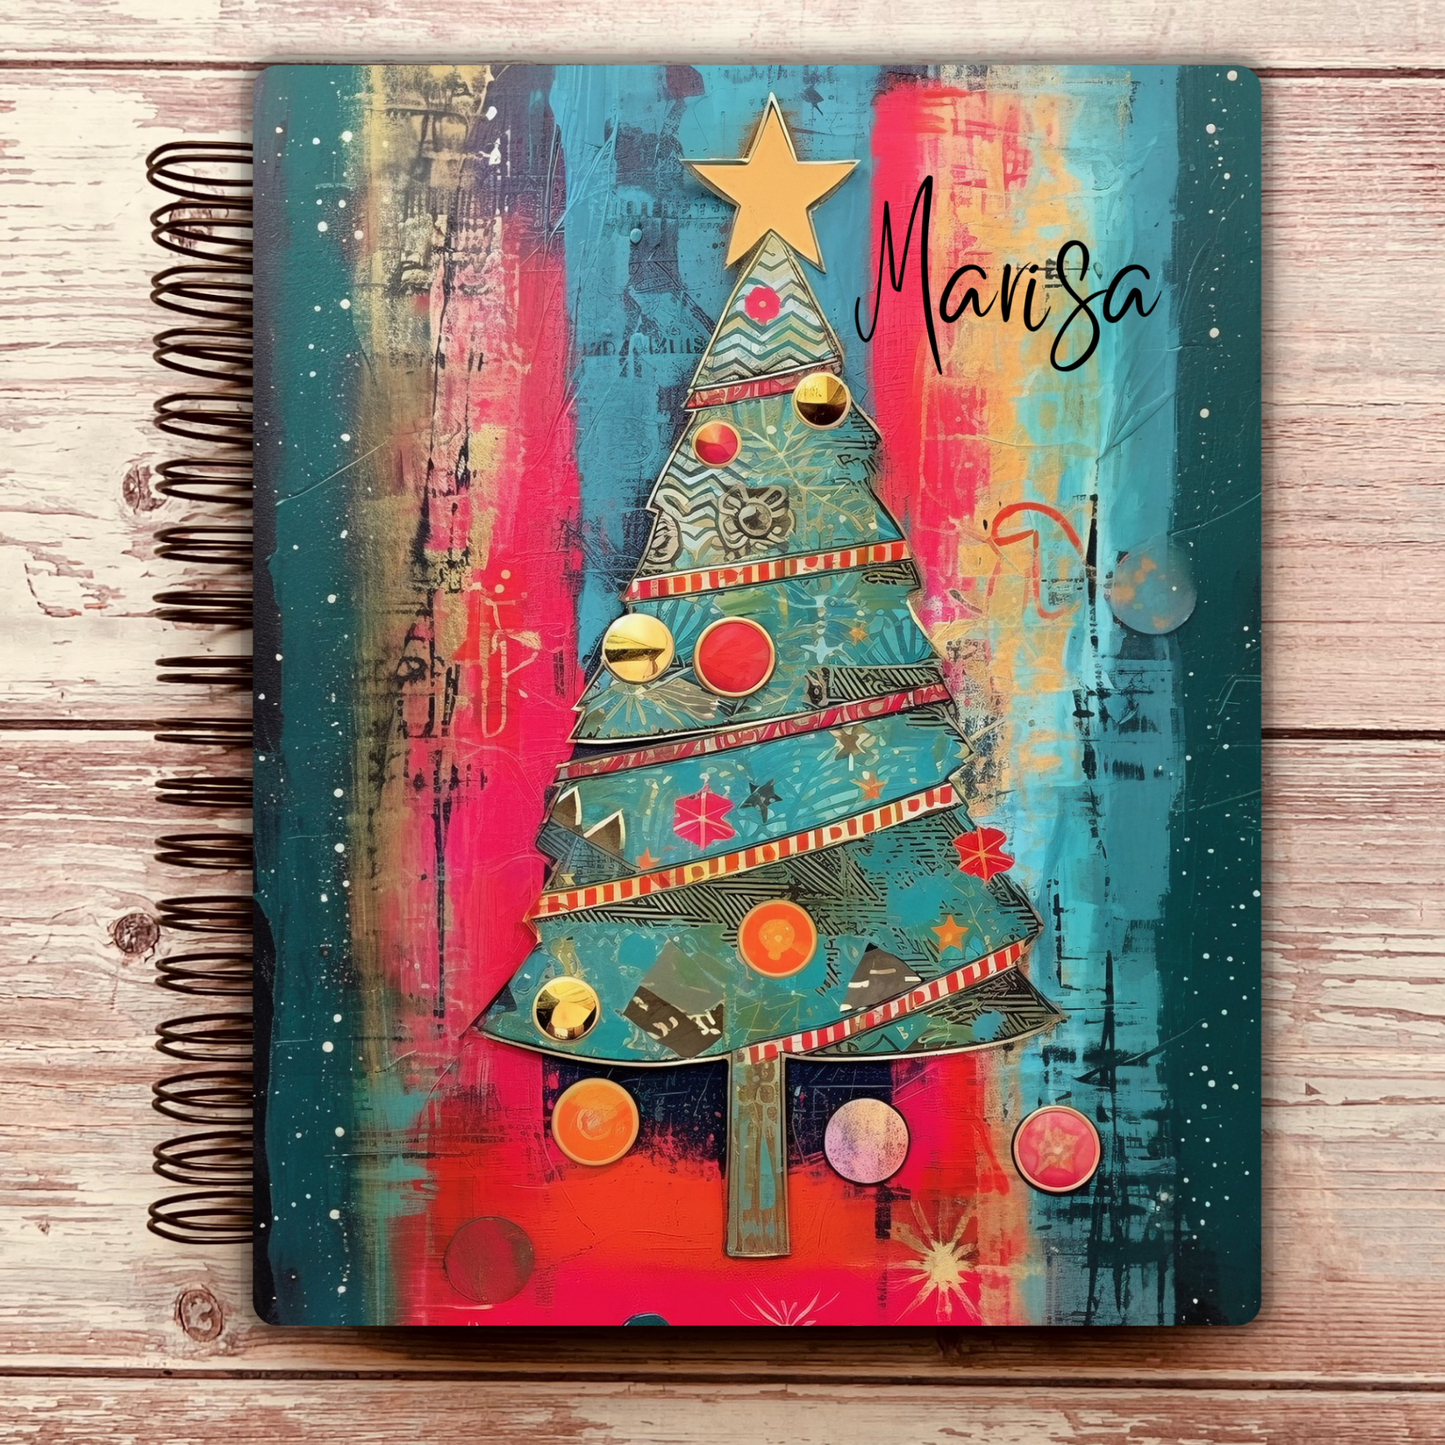 Festive Tree Personal Notebook Journal - Limited Edition